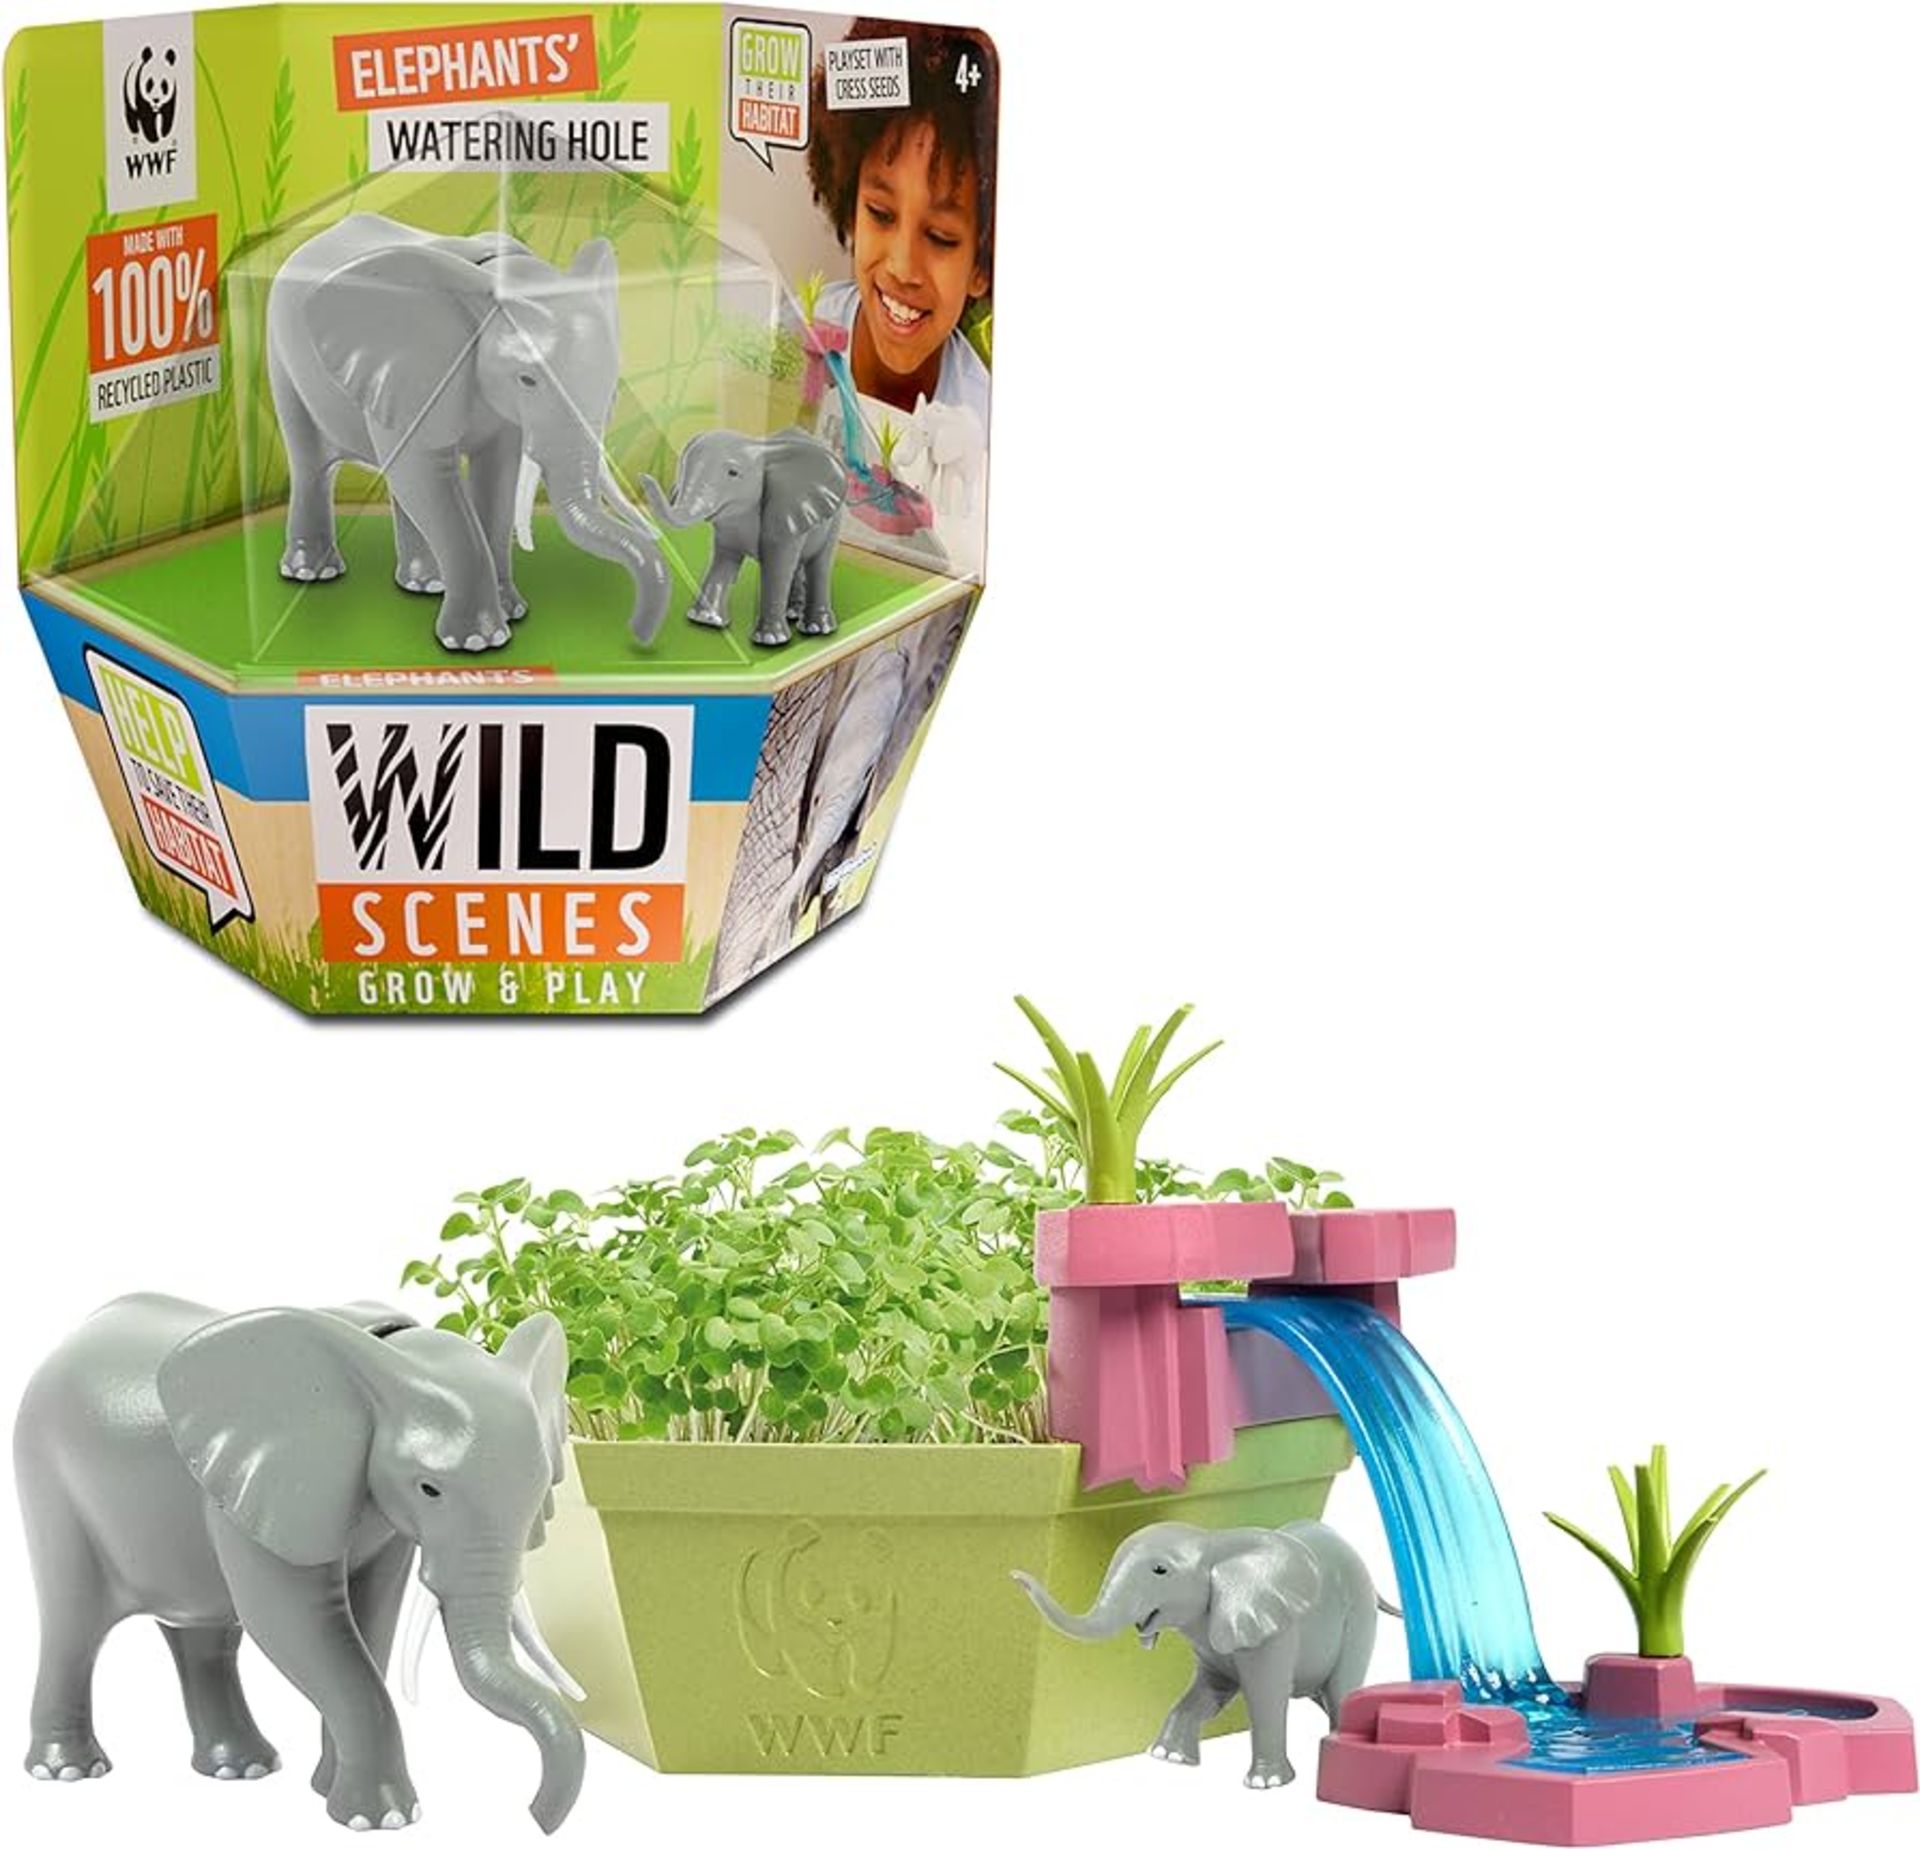 WWF Elephants Watering Hole Scenes Grow and Play Brand New (Delivery Band A)